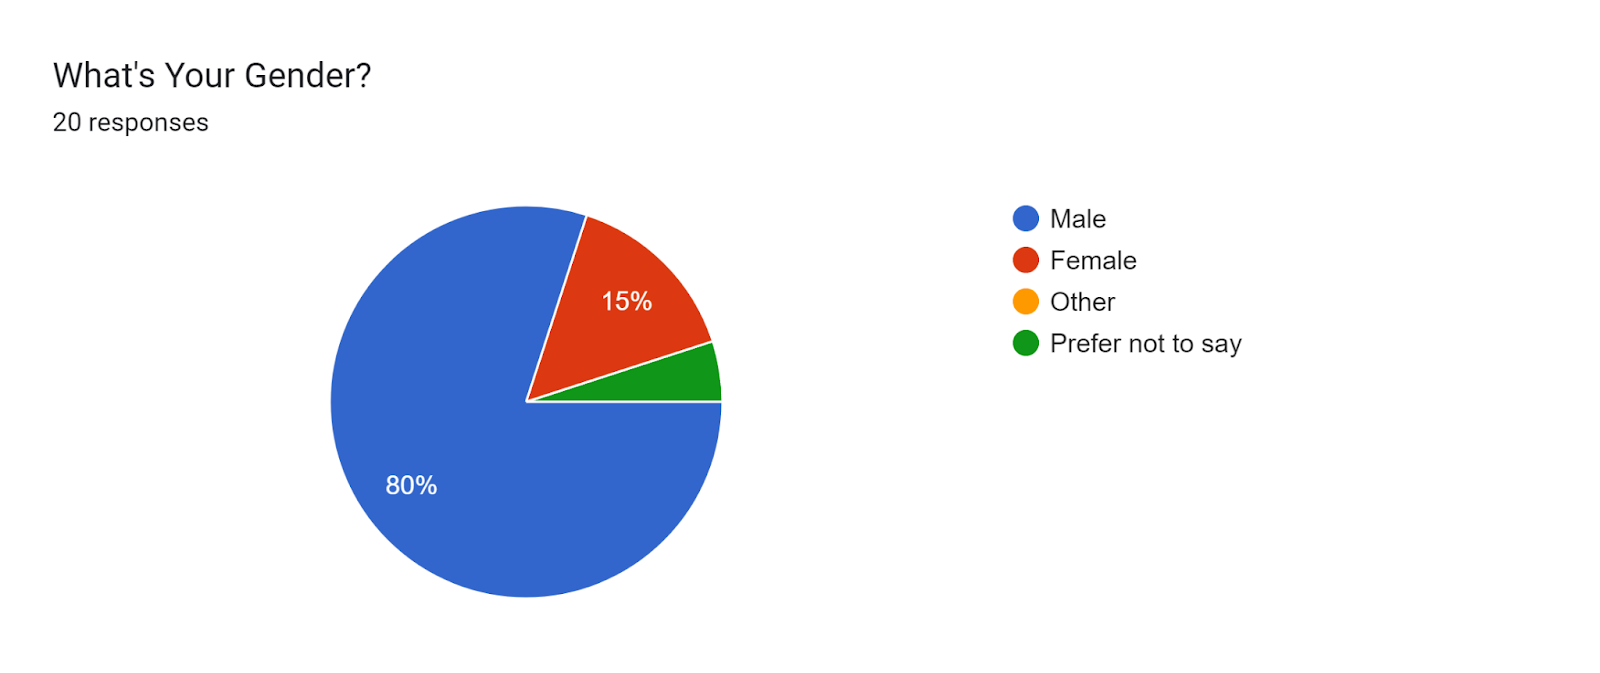 Forms response chart. Question title: What's Your Gender?. Number of responses: 20 responses.